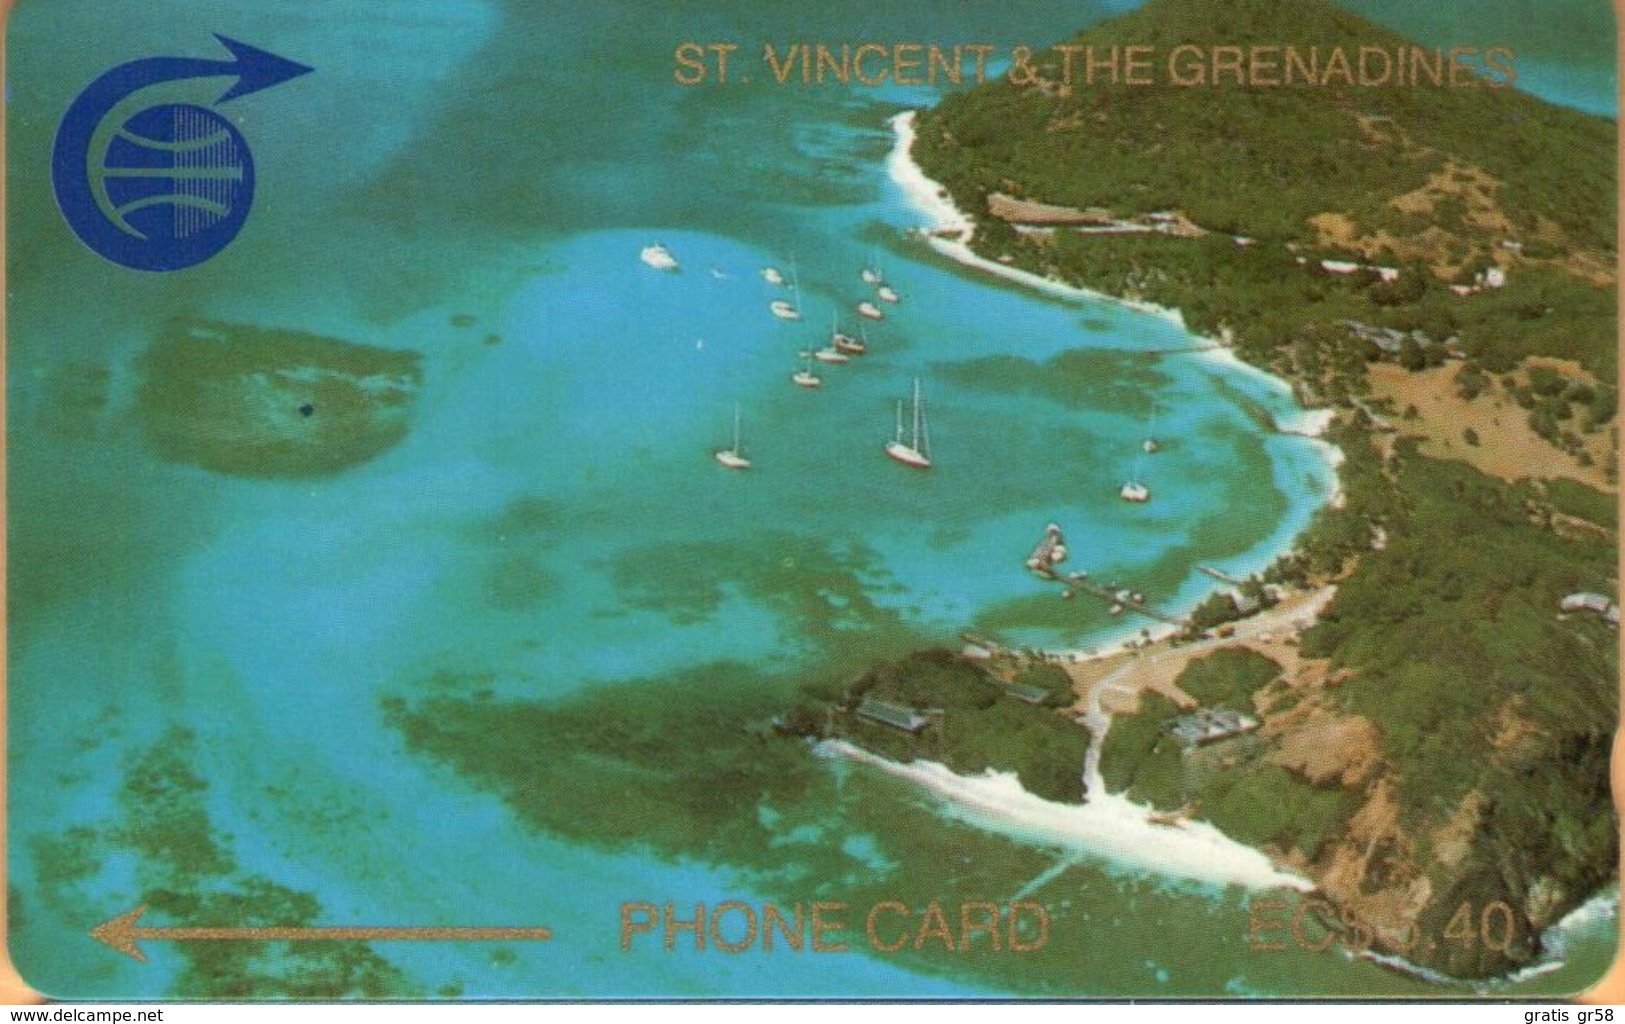 St. Vincent & The Grenadines - STV-2A, GPT, 2CSKA, Admiralty Bay (Small Notch), 5.40 EC$, 1000ex, 1990, Mint - St. Vincent & The Grenadines